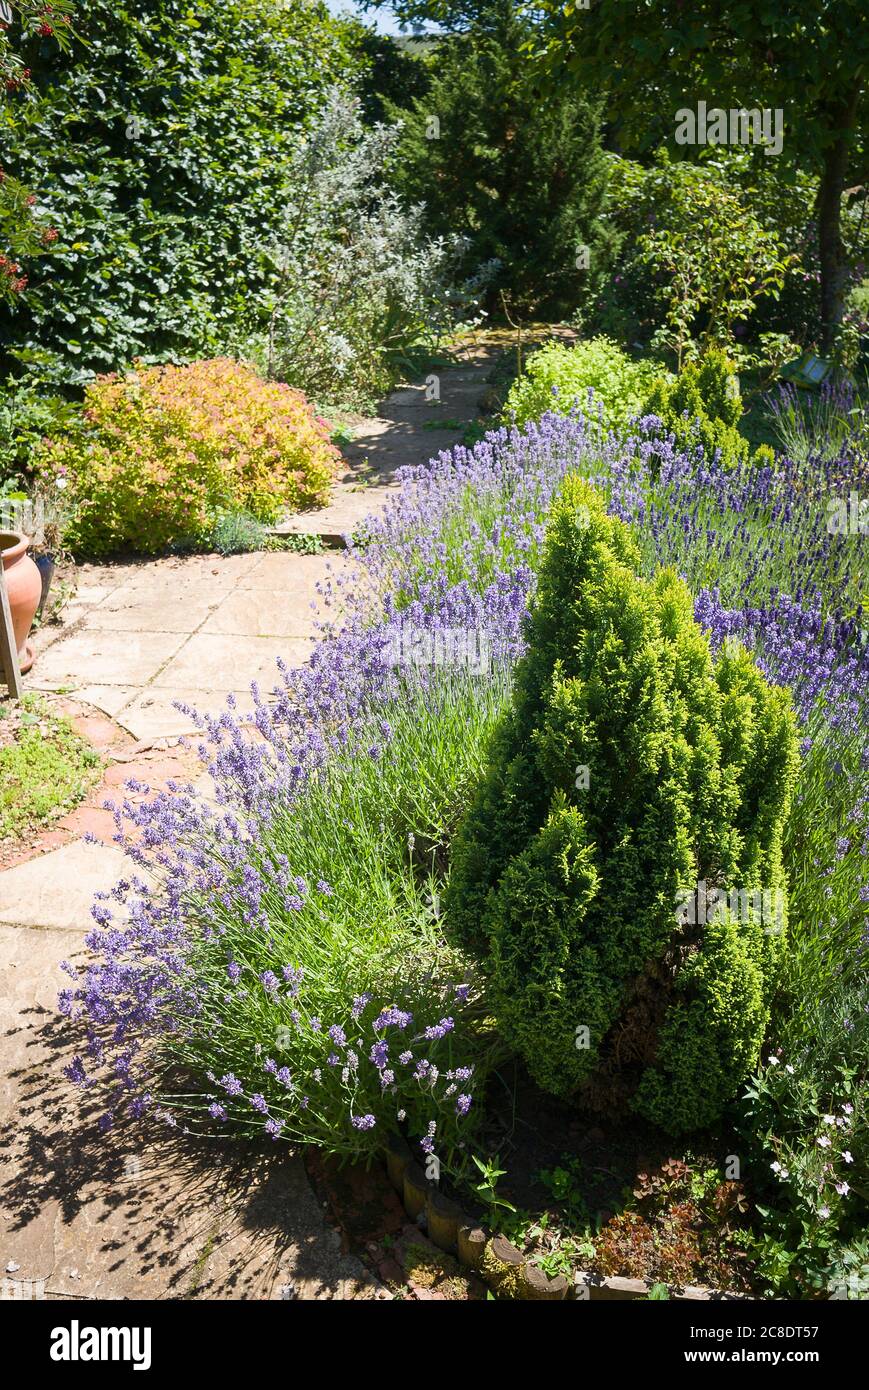 A pleasing view down a paved path through an informal planting of flowering lavenders and conifers and other mixed perennial plants in an English garden Stock Photo